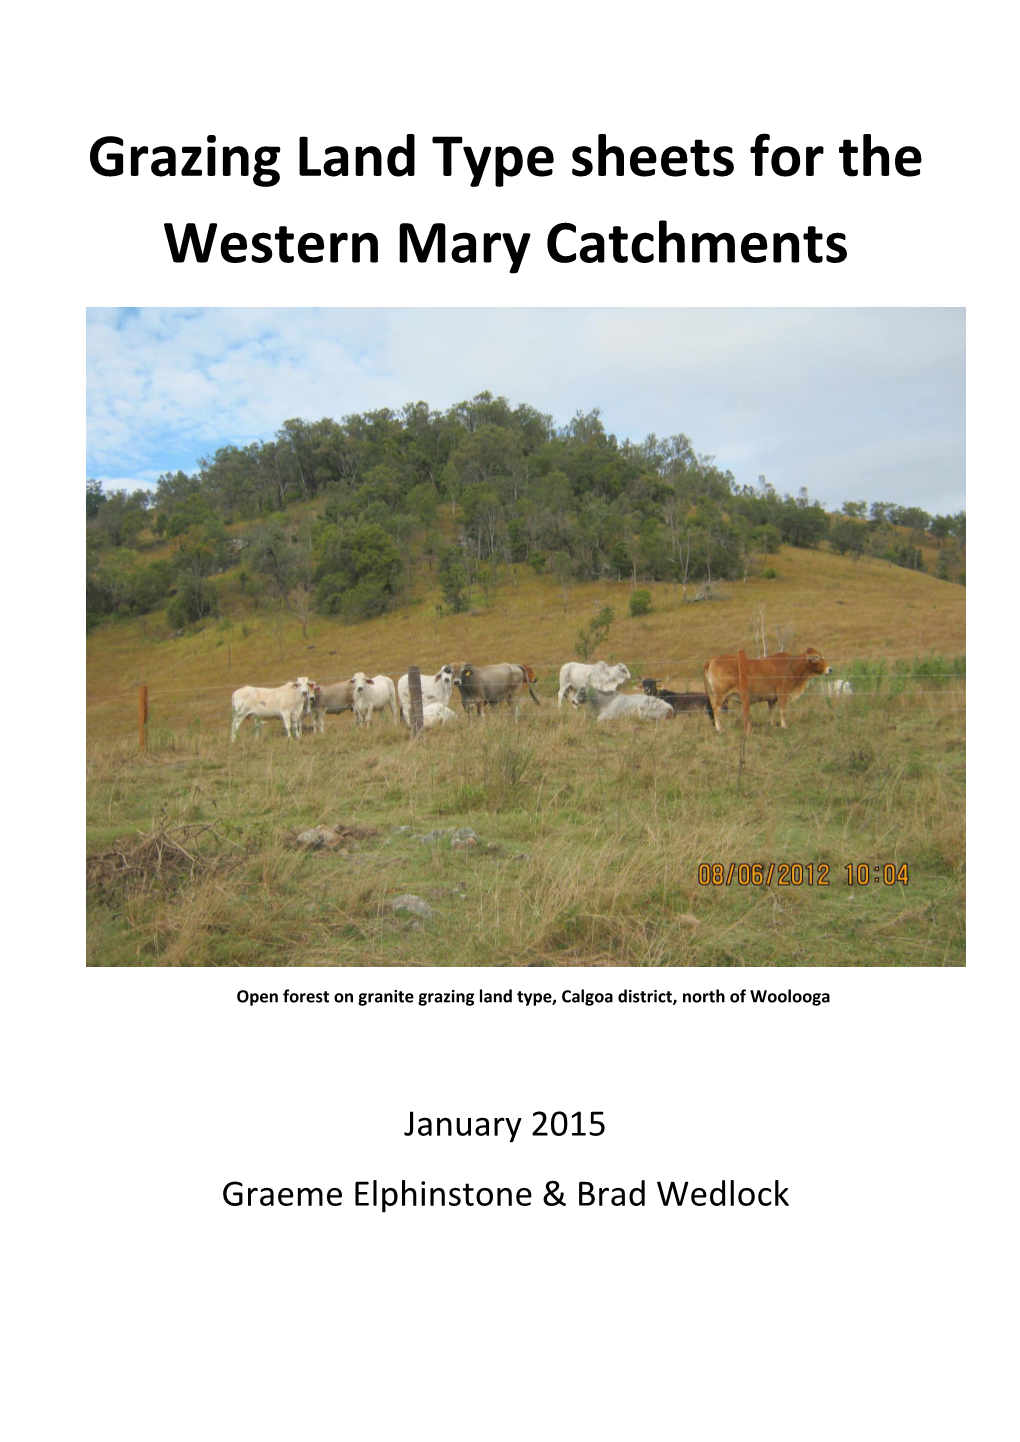 Grazing Land Type Sheets for the Western Mary Catchments